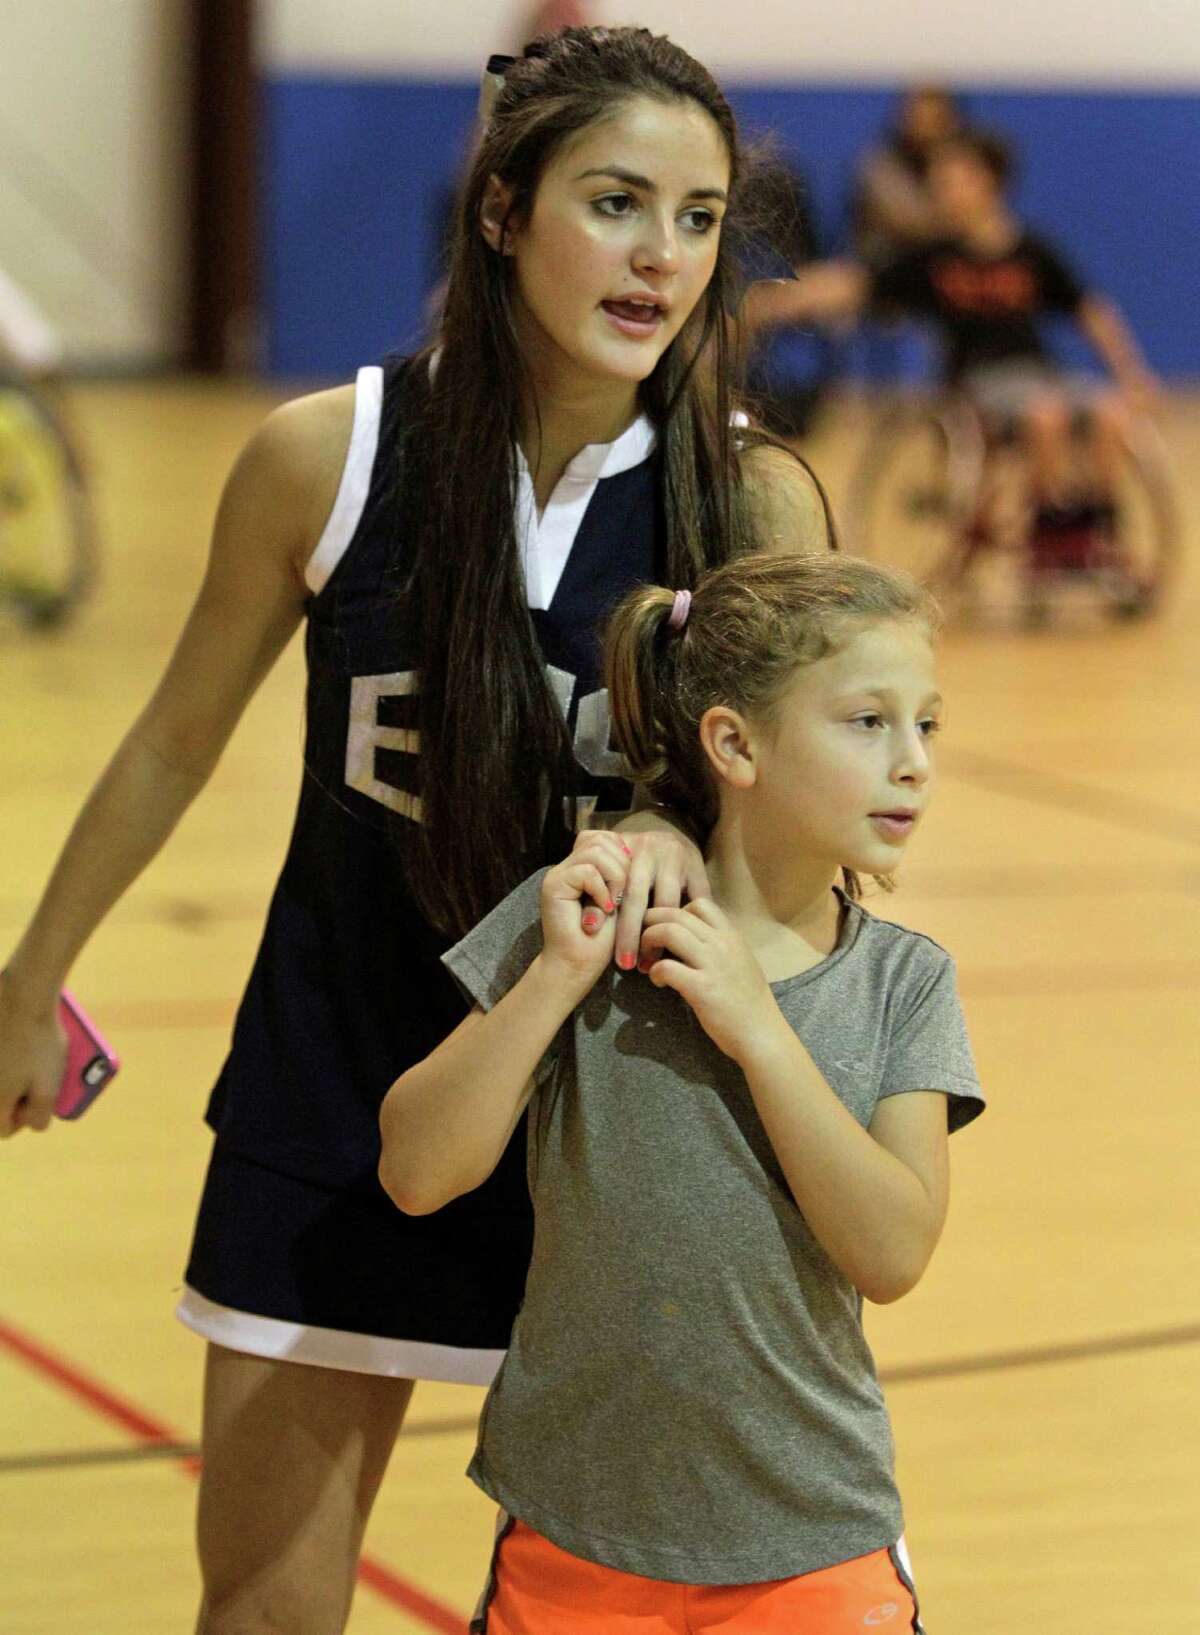 Willa Berry holds onto Molly Horowitz, 16, a junior at Emery/Weiner High School during a wheelchair basketball fundraiser at The Zone, 10371 Stella Link, Sunday, Aug. 25, 2013, in Houston. Willa and her two brothers, Peter and Aaron, survived a car accident that killed their father and mother, Josh and Robin Berry, on July 2, 2011, in West Texas while on their way back from a family vacation in Colorado. Peter and Aaron were left paralyzed. ( Melissa Phillip / Houston Chronicle )